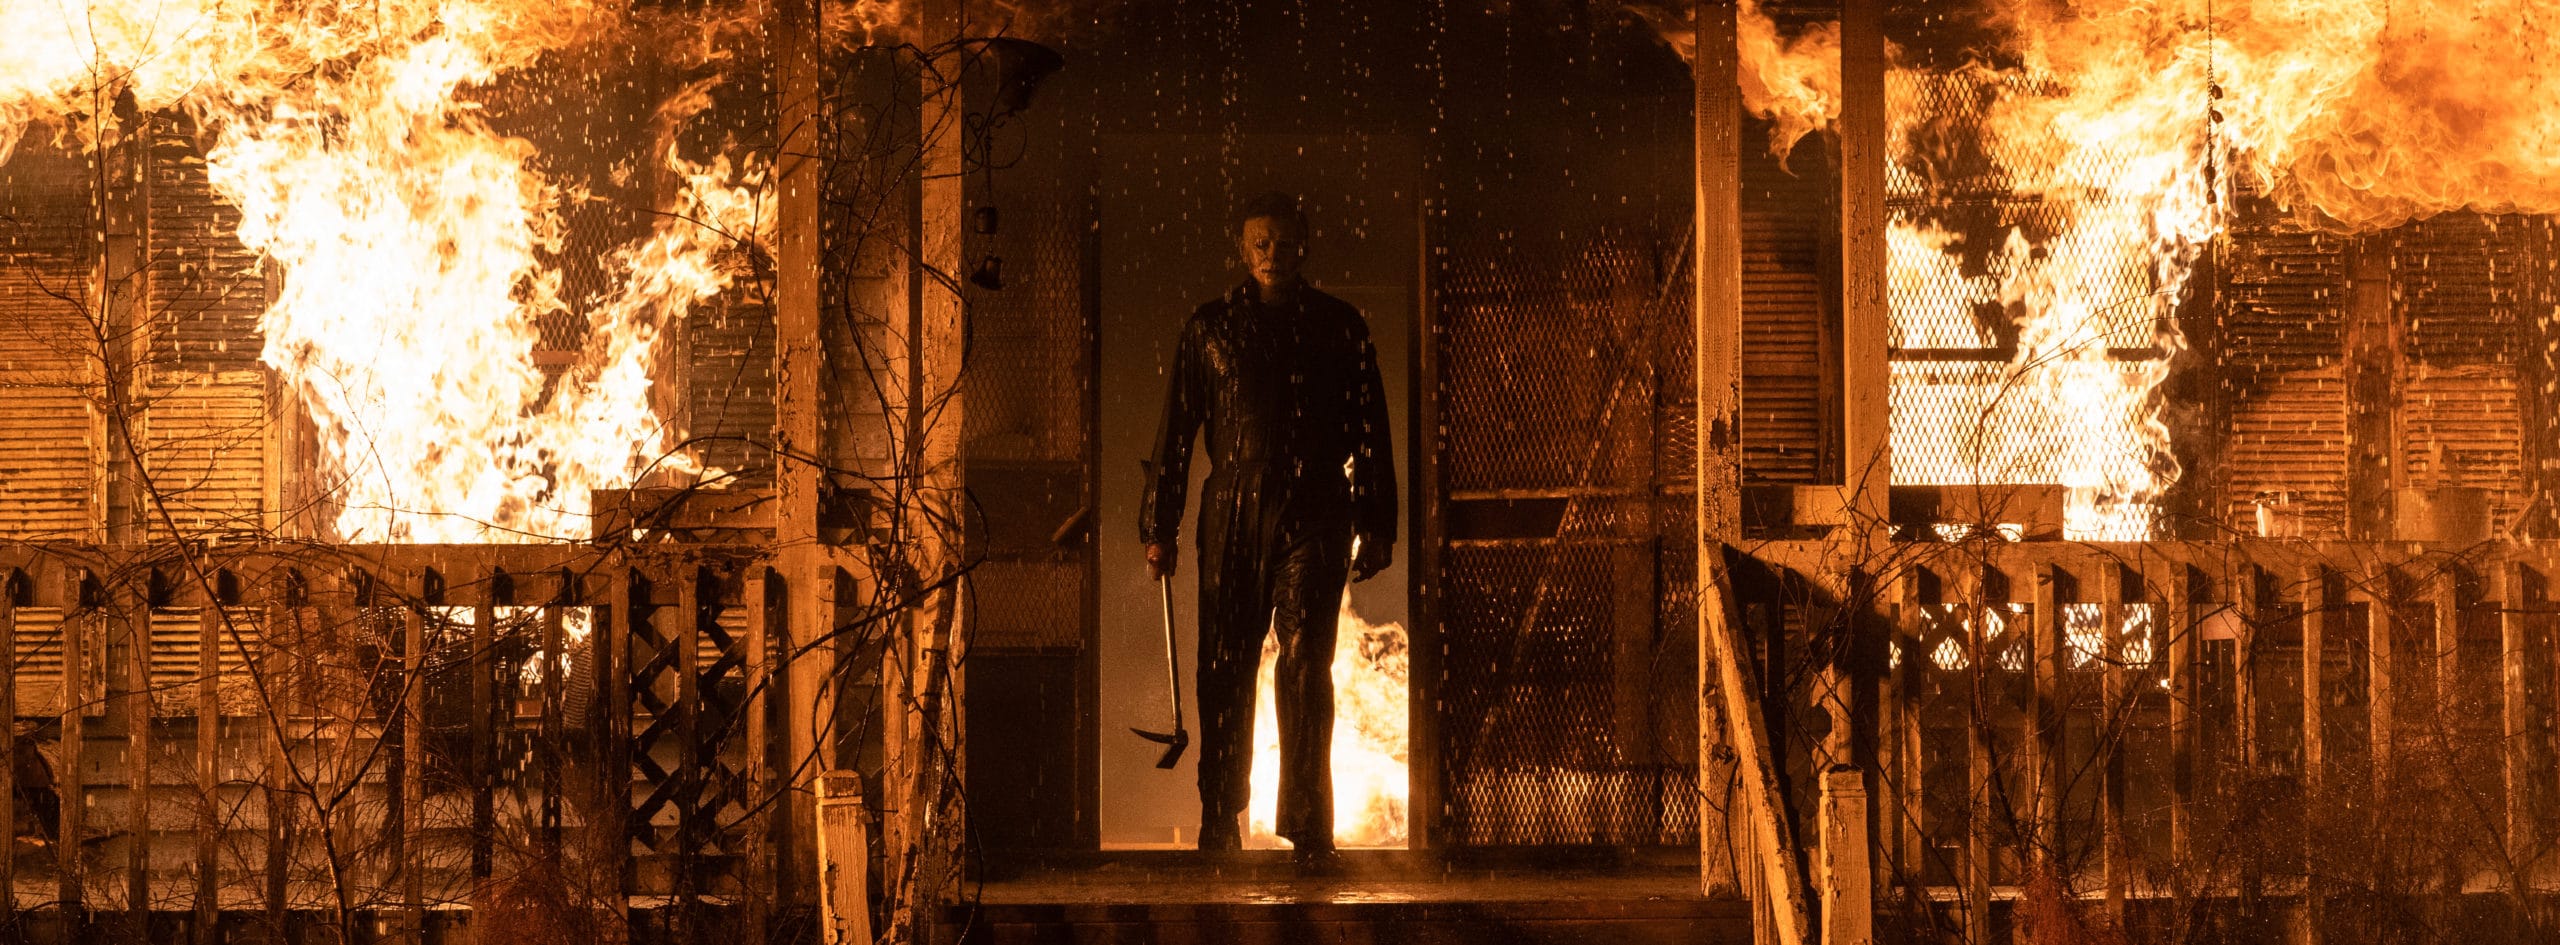 Flammeninferno Michael Myers (aka The Shape) in Halloween Kills, directed by David Gordon Green © 2021 UNIVERSAL STUDIOS. All Rights Reserved.